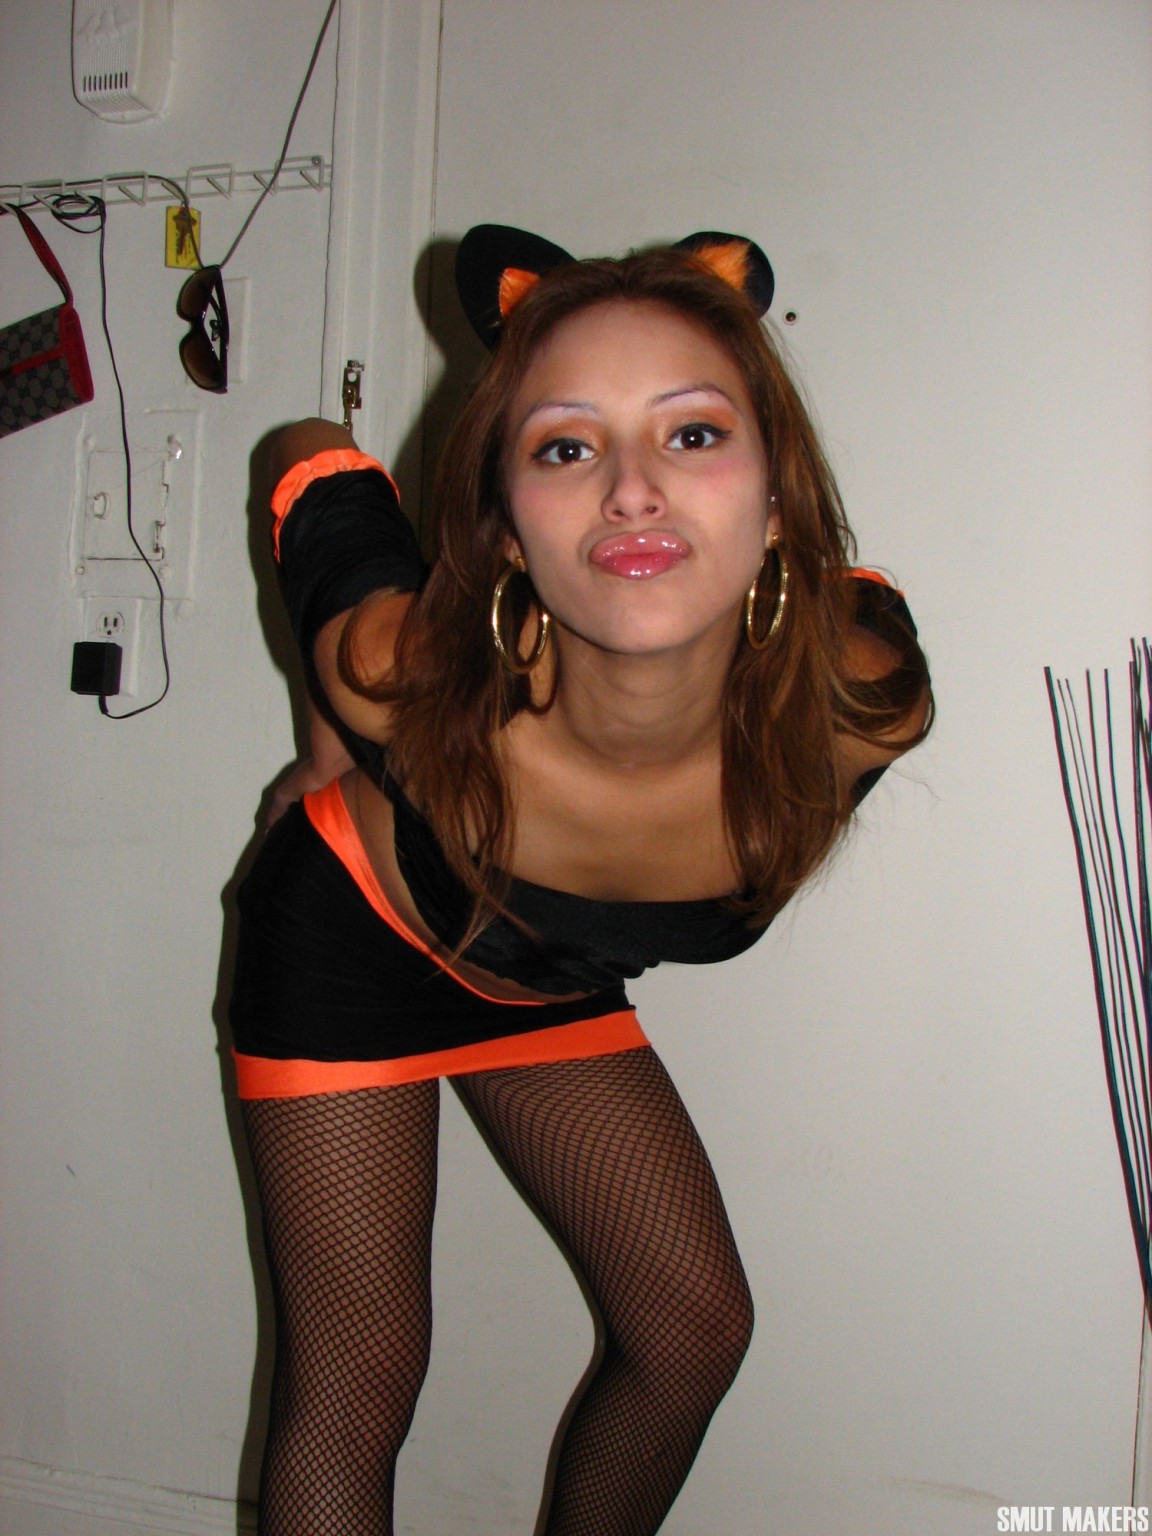 Smut Makes presents a naughty teen in pussy costume for Halloween #67366075